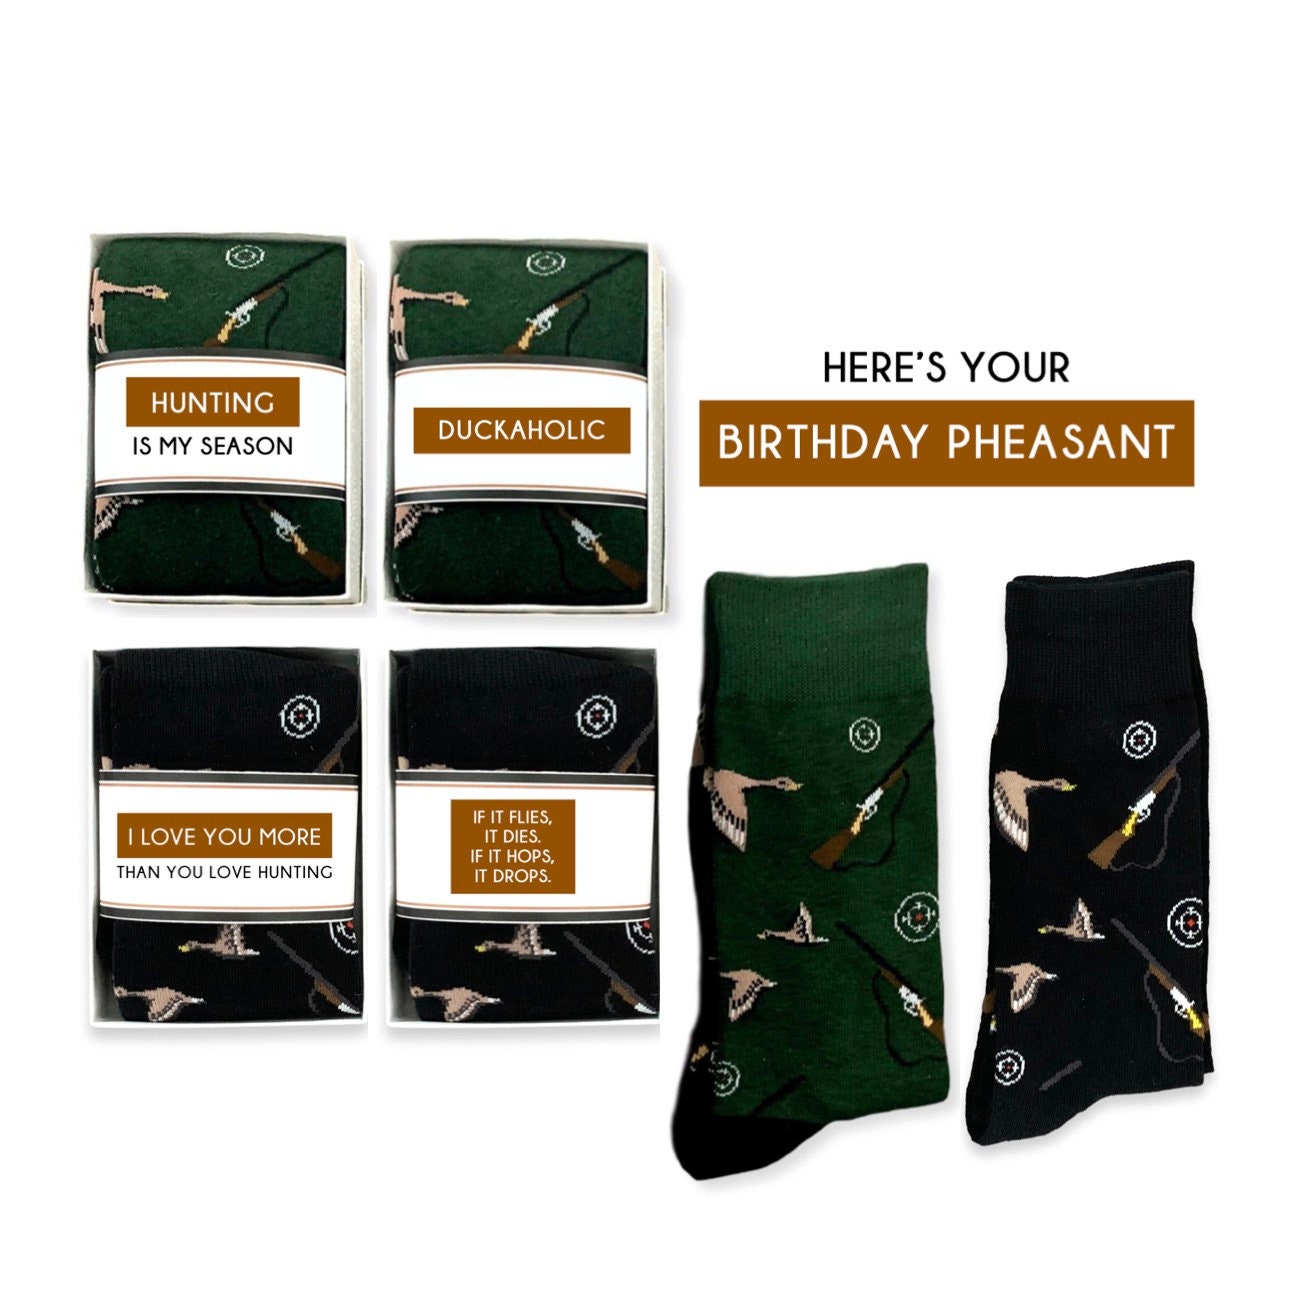 Funny Hunting Gifts for Dad, Husband, Love to Hunt, Hunter Birthday Gift, Pheasant, Bird Hunting Season, Duck Hunting Socks, Father's Day